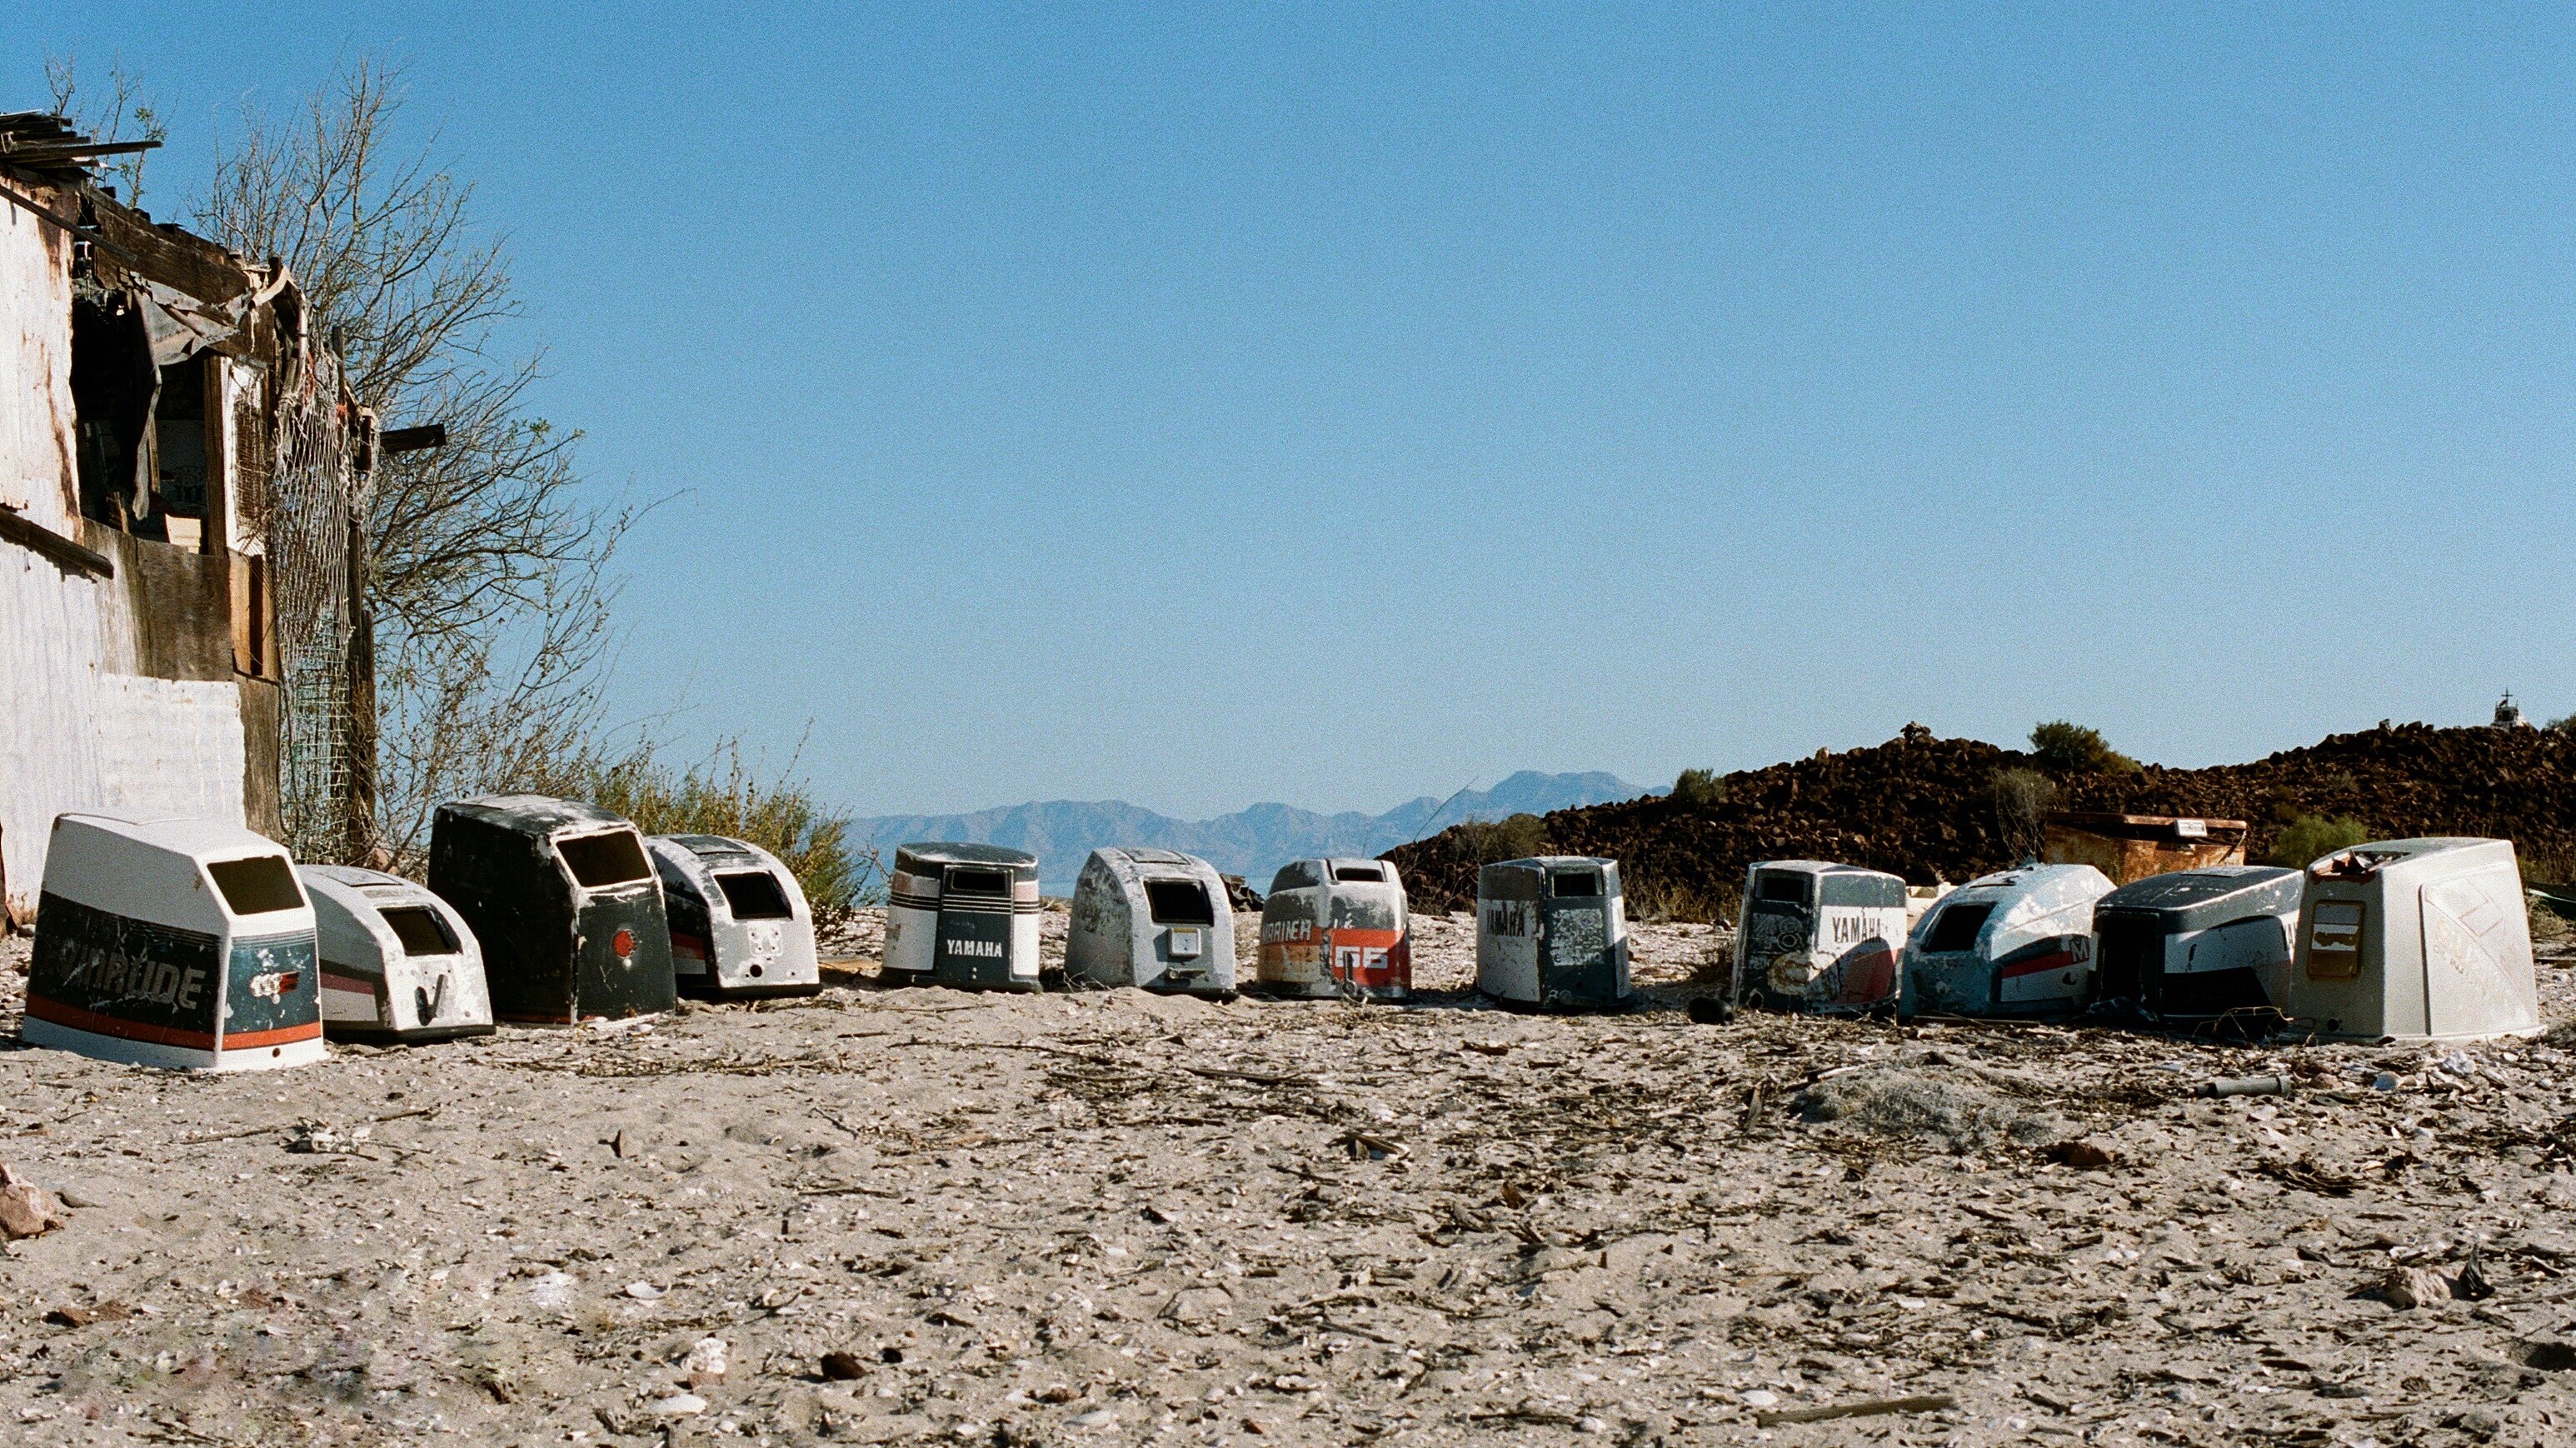 Outboard motor covers arranged in a semi-circle in an abandoned fish-camp. The fishing industry in Baja, one of the main local sources of income, has declined due to overfishing and an emphasis on sport-fishing tourism.